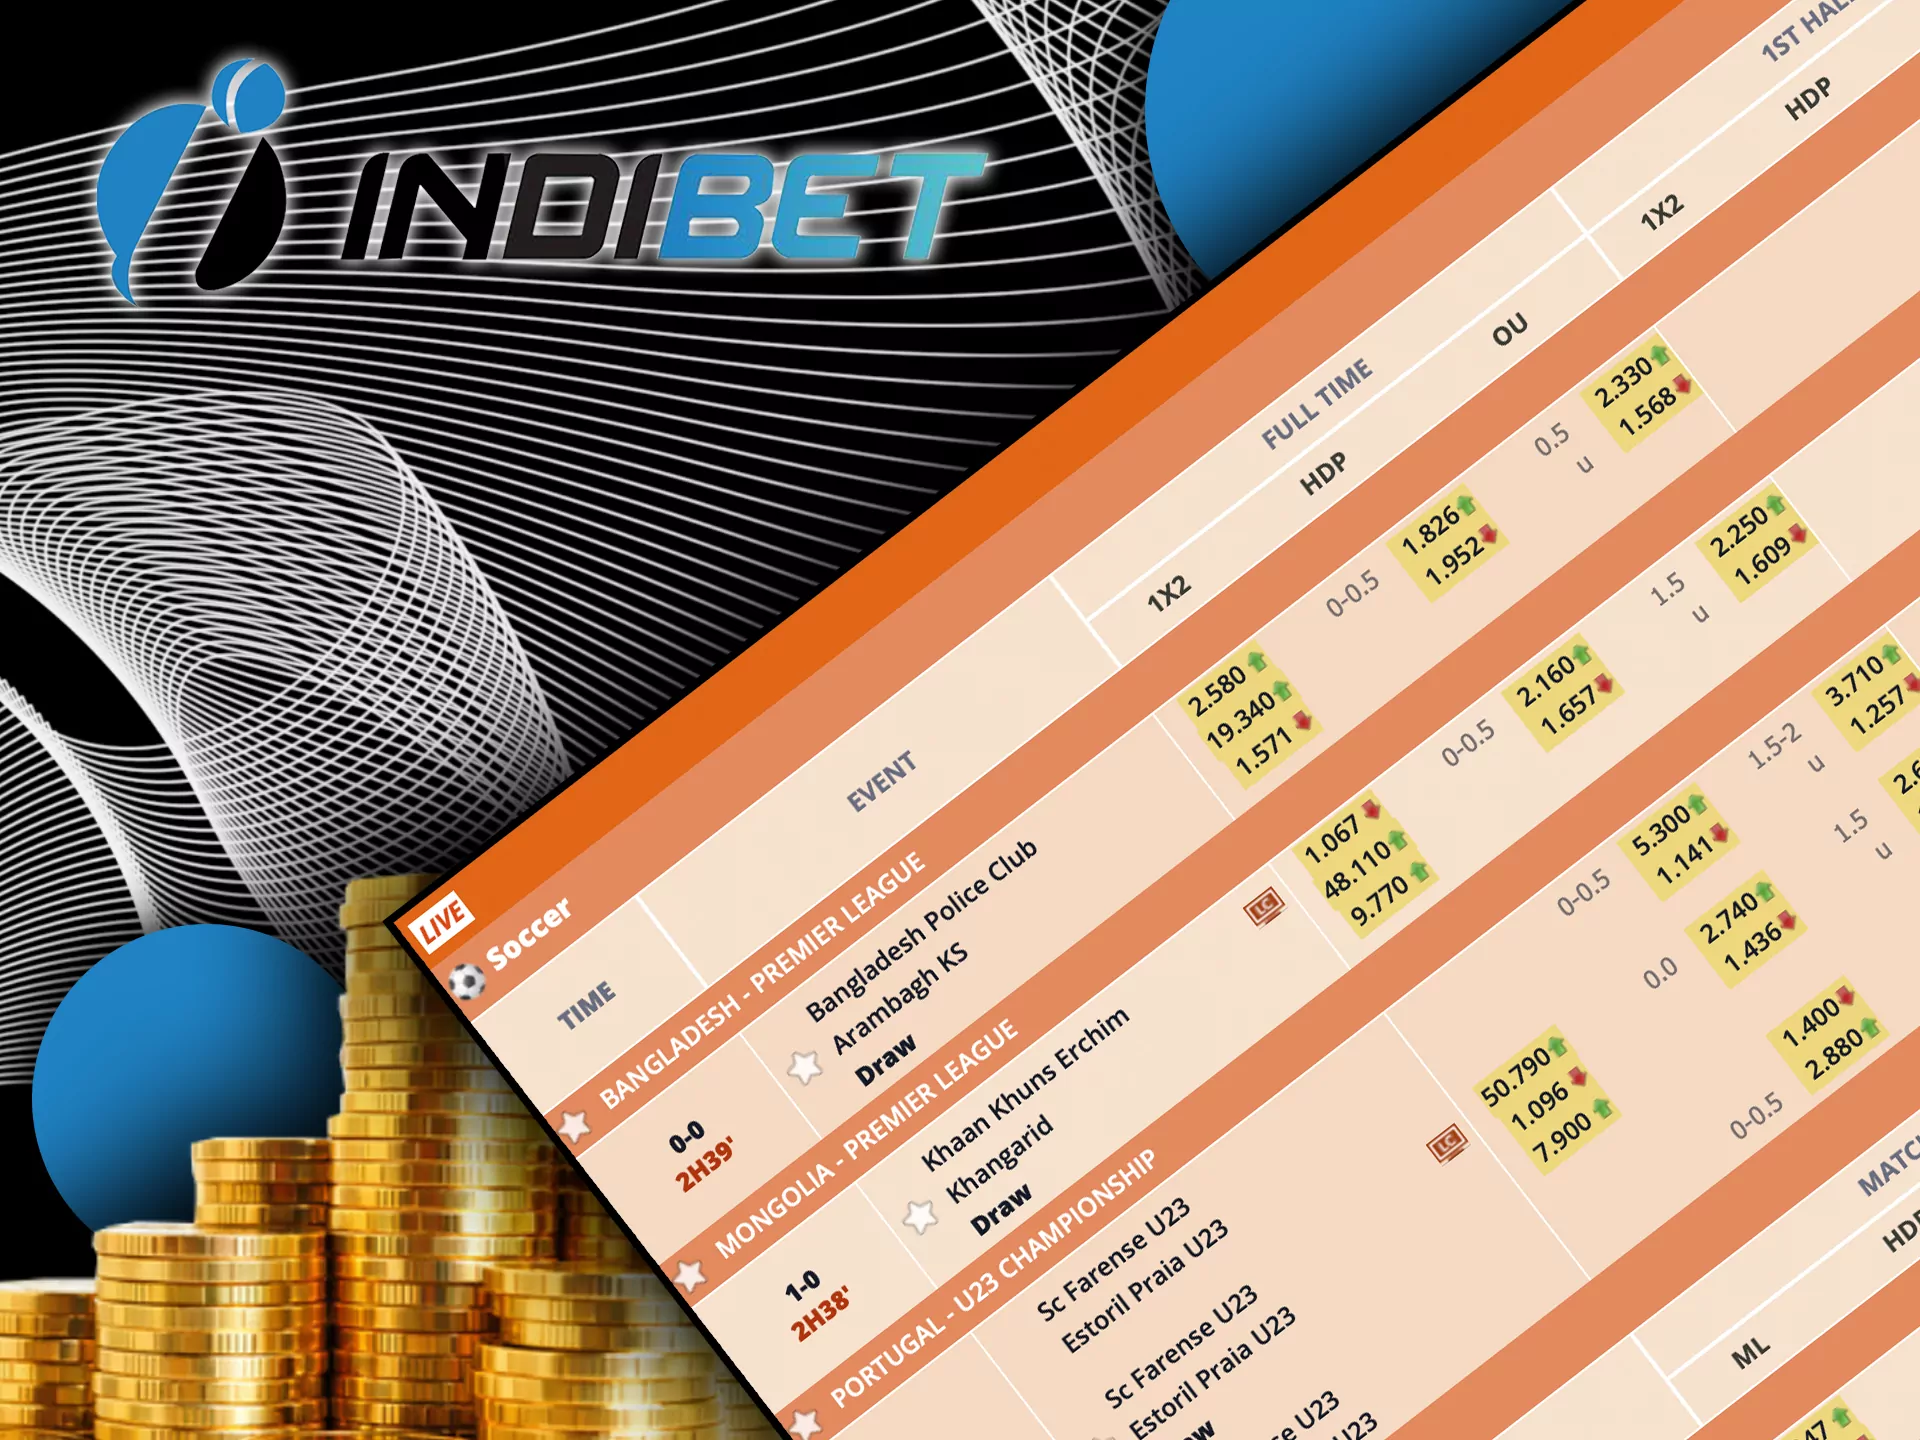 You can watch mathces and bet on them right on the Indibet page.